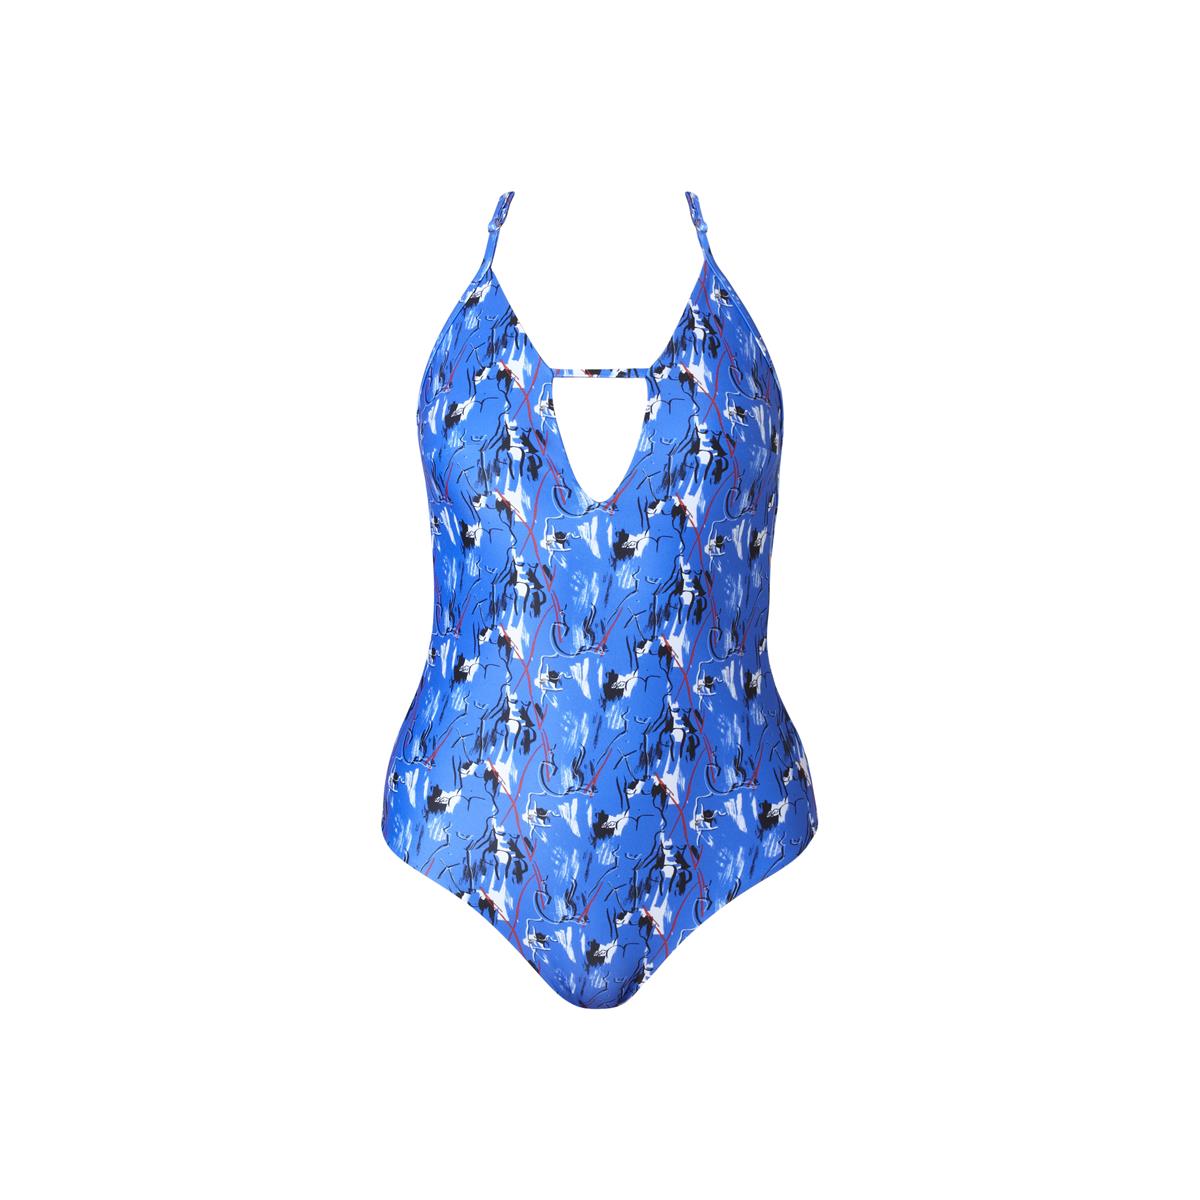 MARGARET AND HERMIONE_SS18_Swimsuit No.2_women_EUR 197